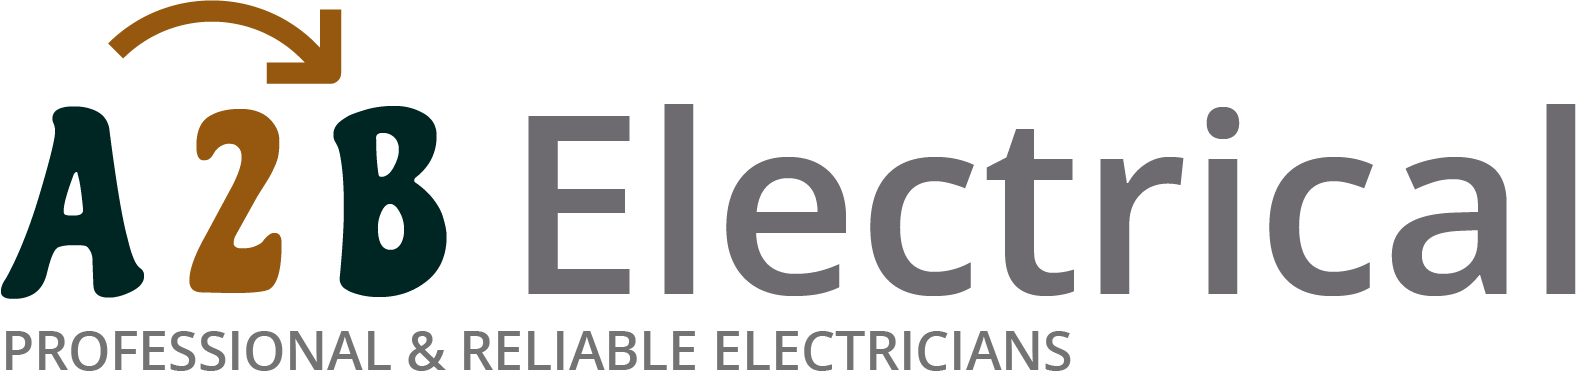 If you have electrical wiring problems in Plaistow, we can provide an electrician to have a look for you. 